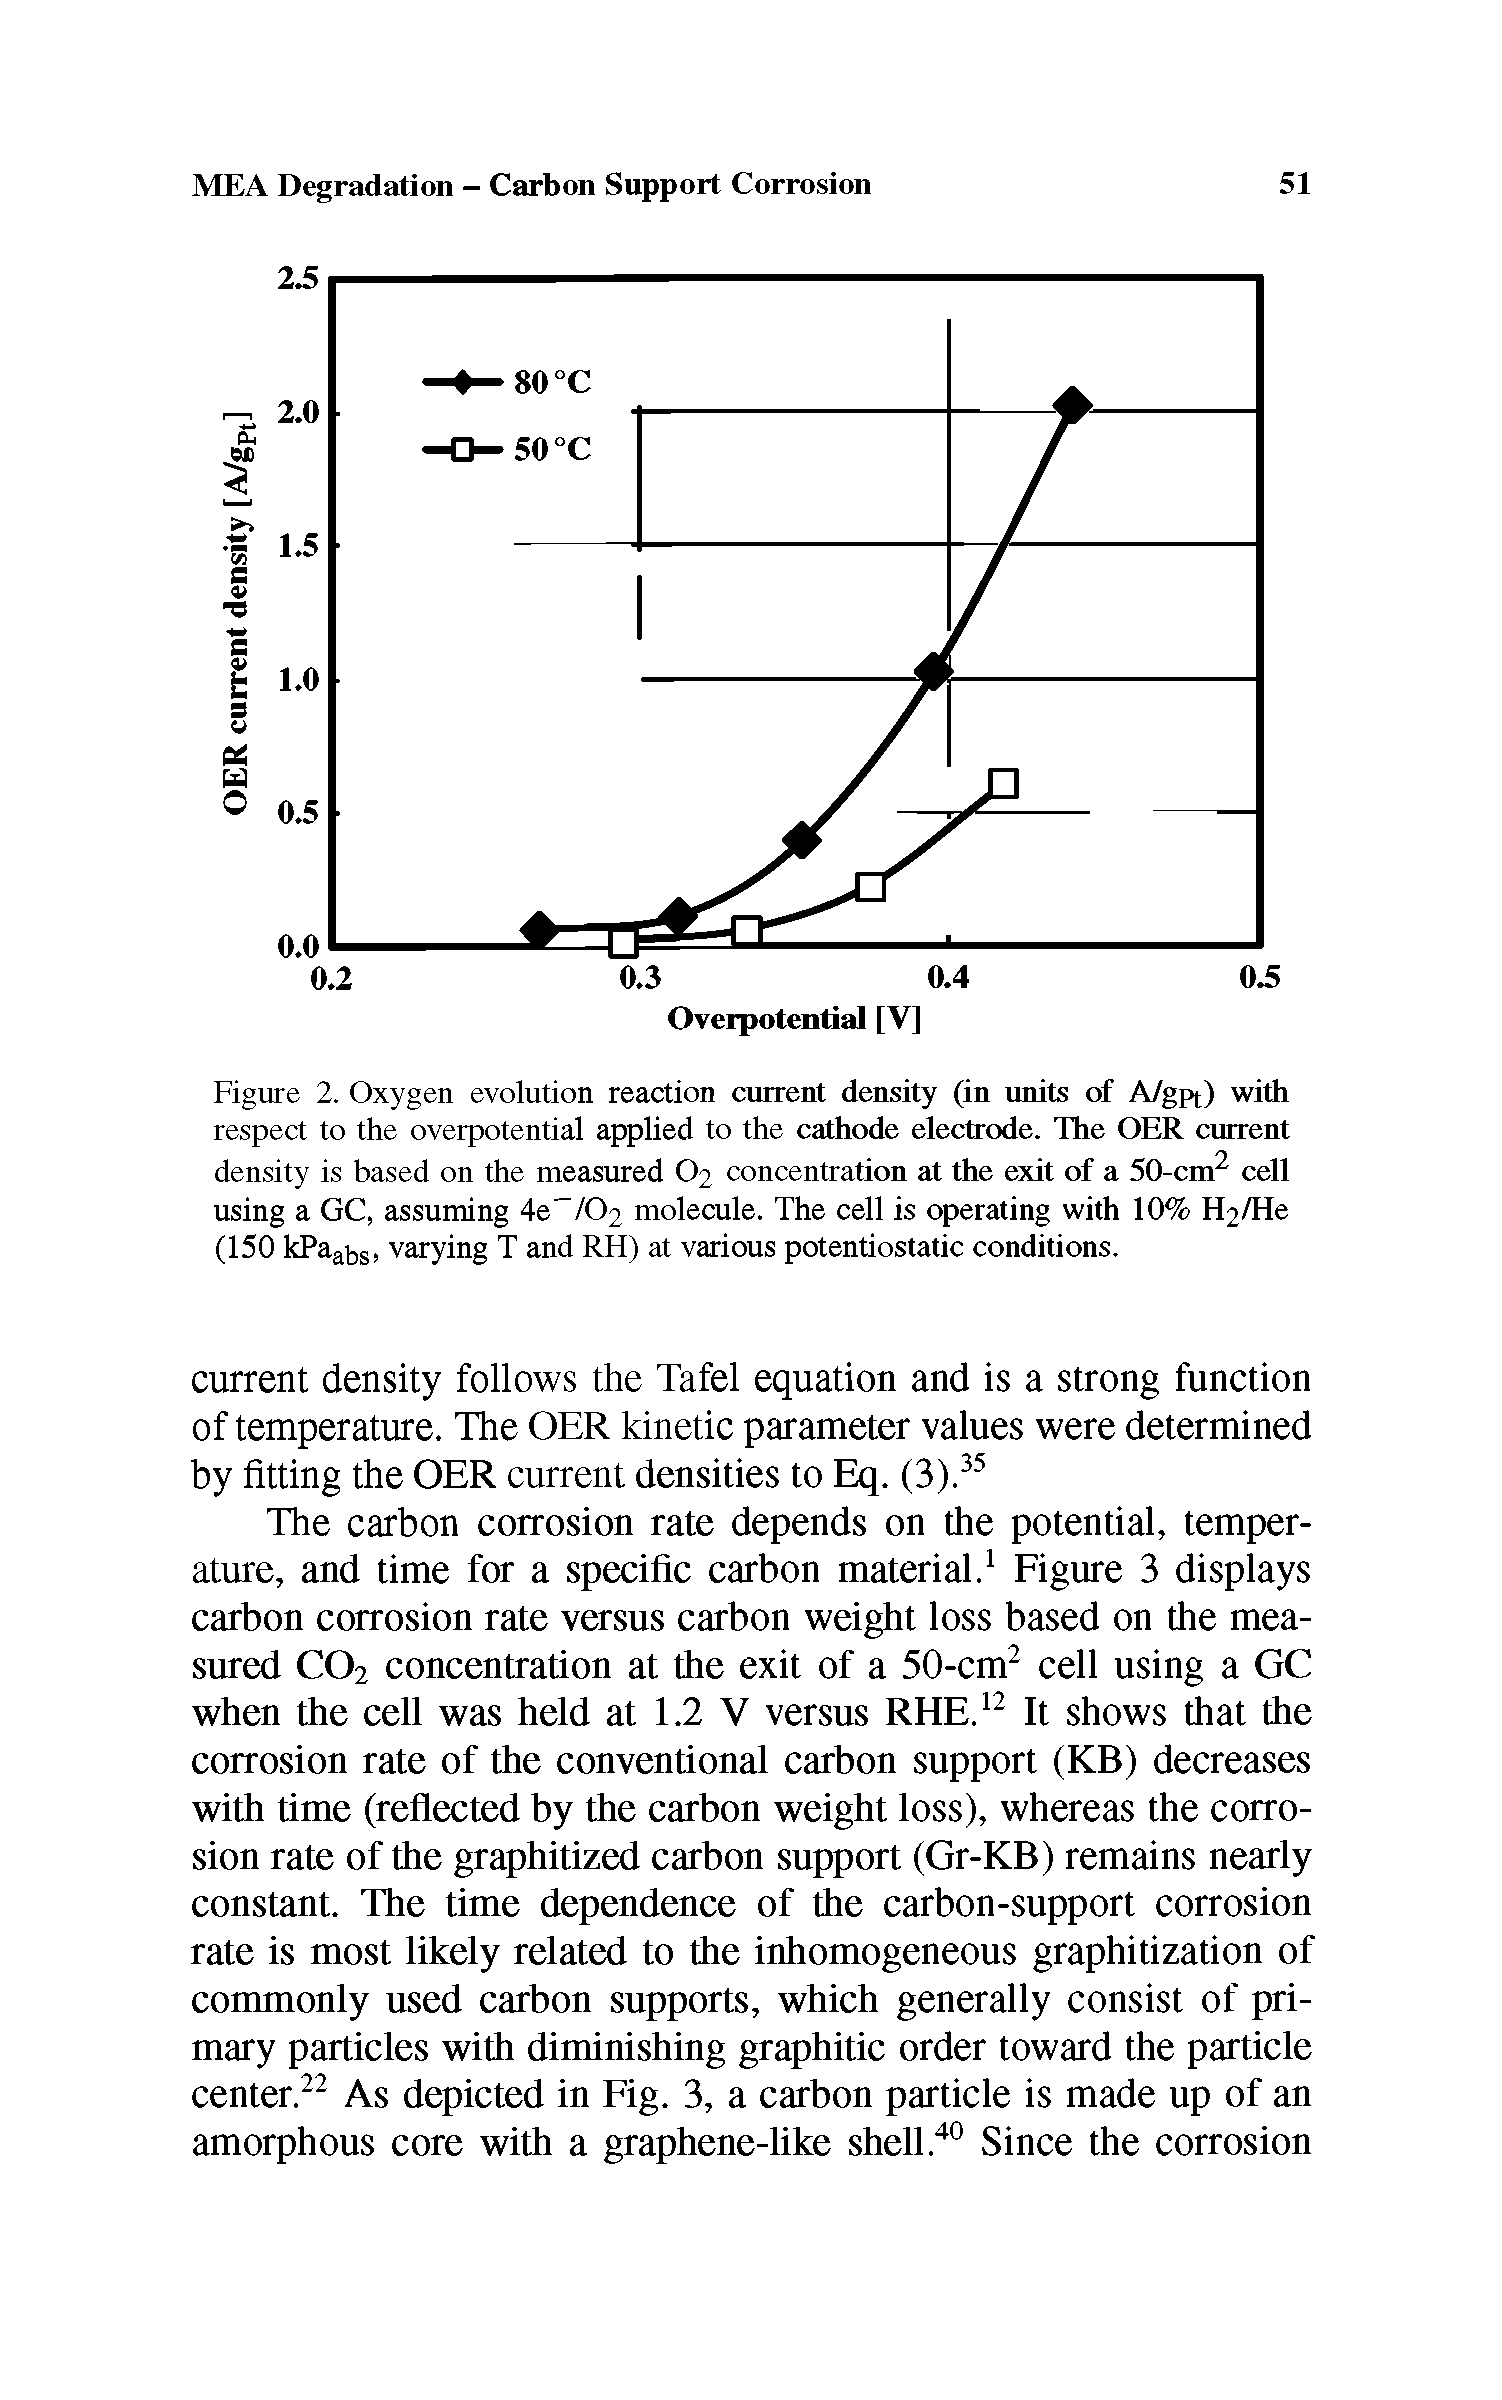 Figure 2. Oxygen evolution reaction current density (in units of A/gpt) with respect to the overpotential applied to the cathode electrode. The OER current density is based on the measured O2 concentration at the exit of a 50-cm2 cell using a GC, assuming 4e-/C>2 molecule. The cell is operating with 10% H2/He (150 kPaabs, varying T and RH) at various potentiostatic conditions.